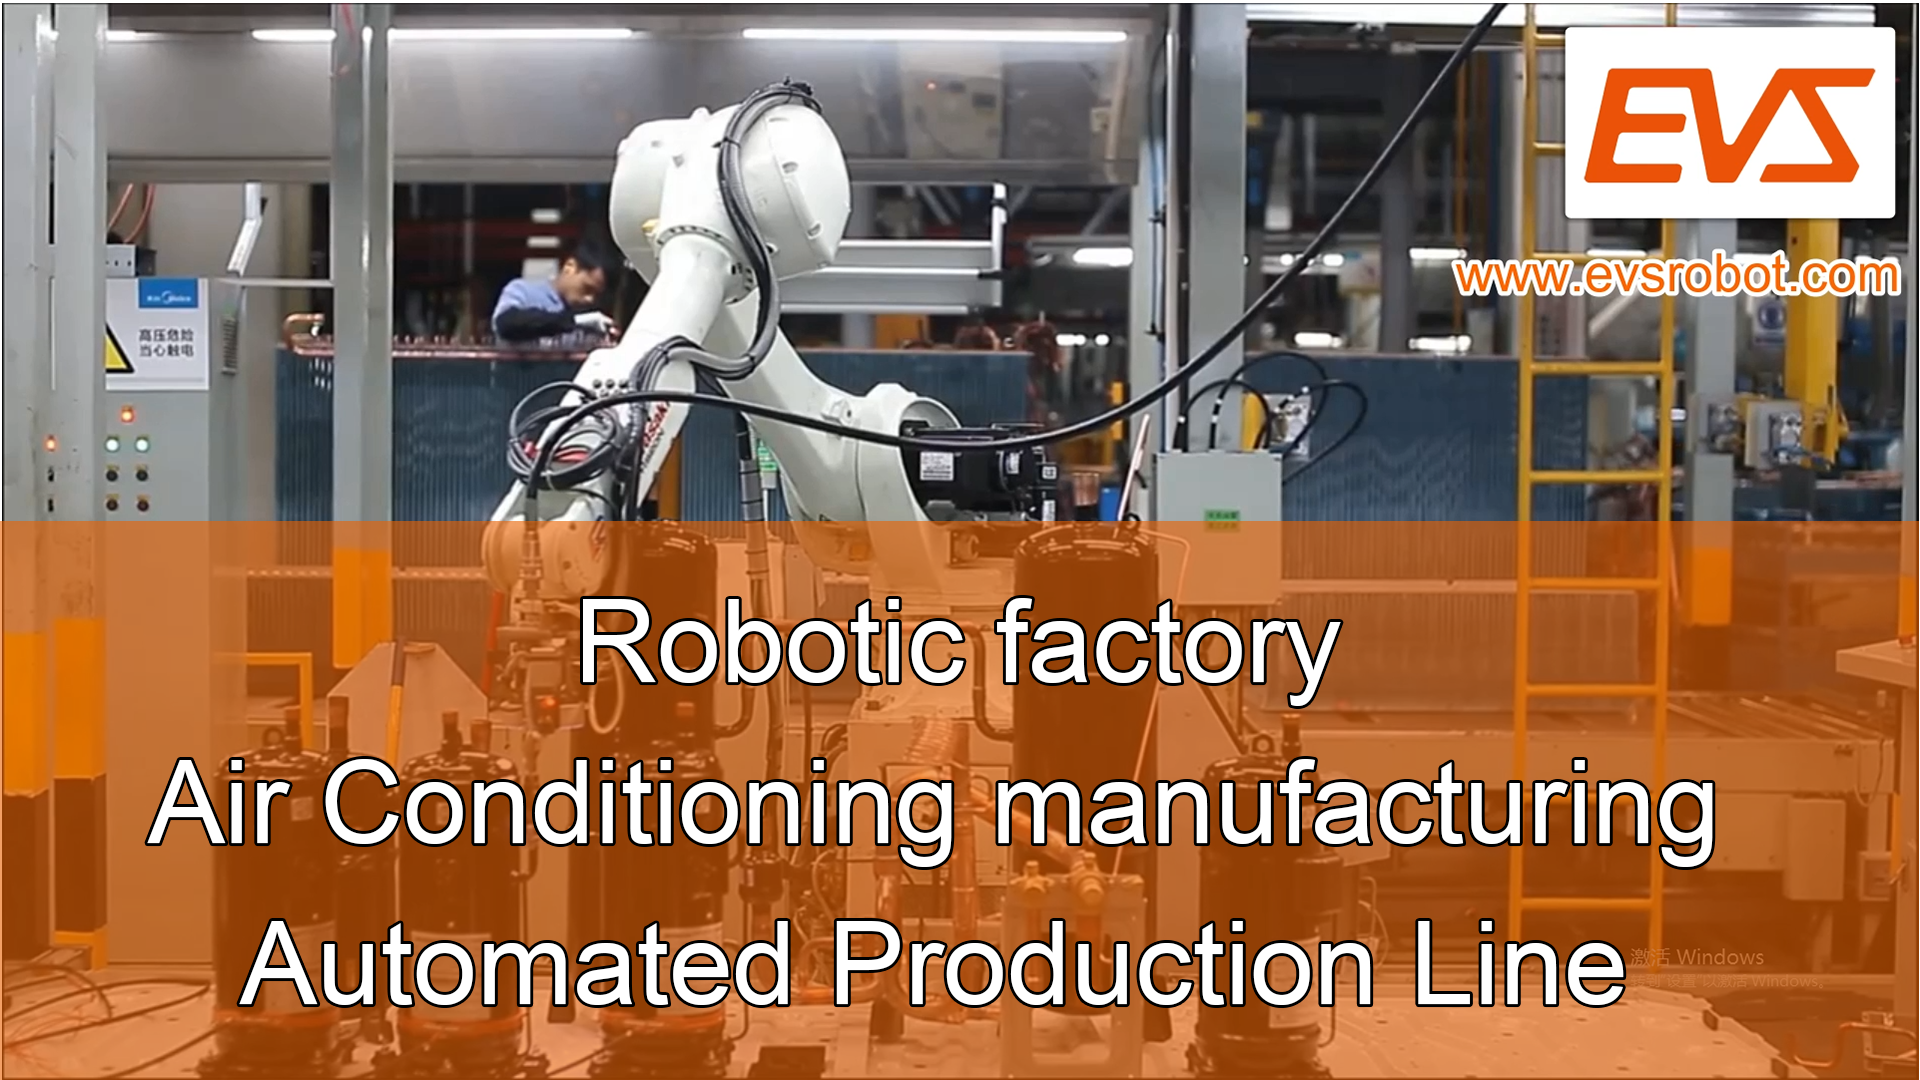 Robotic factory | Air Conditioning manufacturing | Automated Production Line